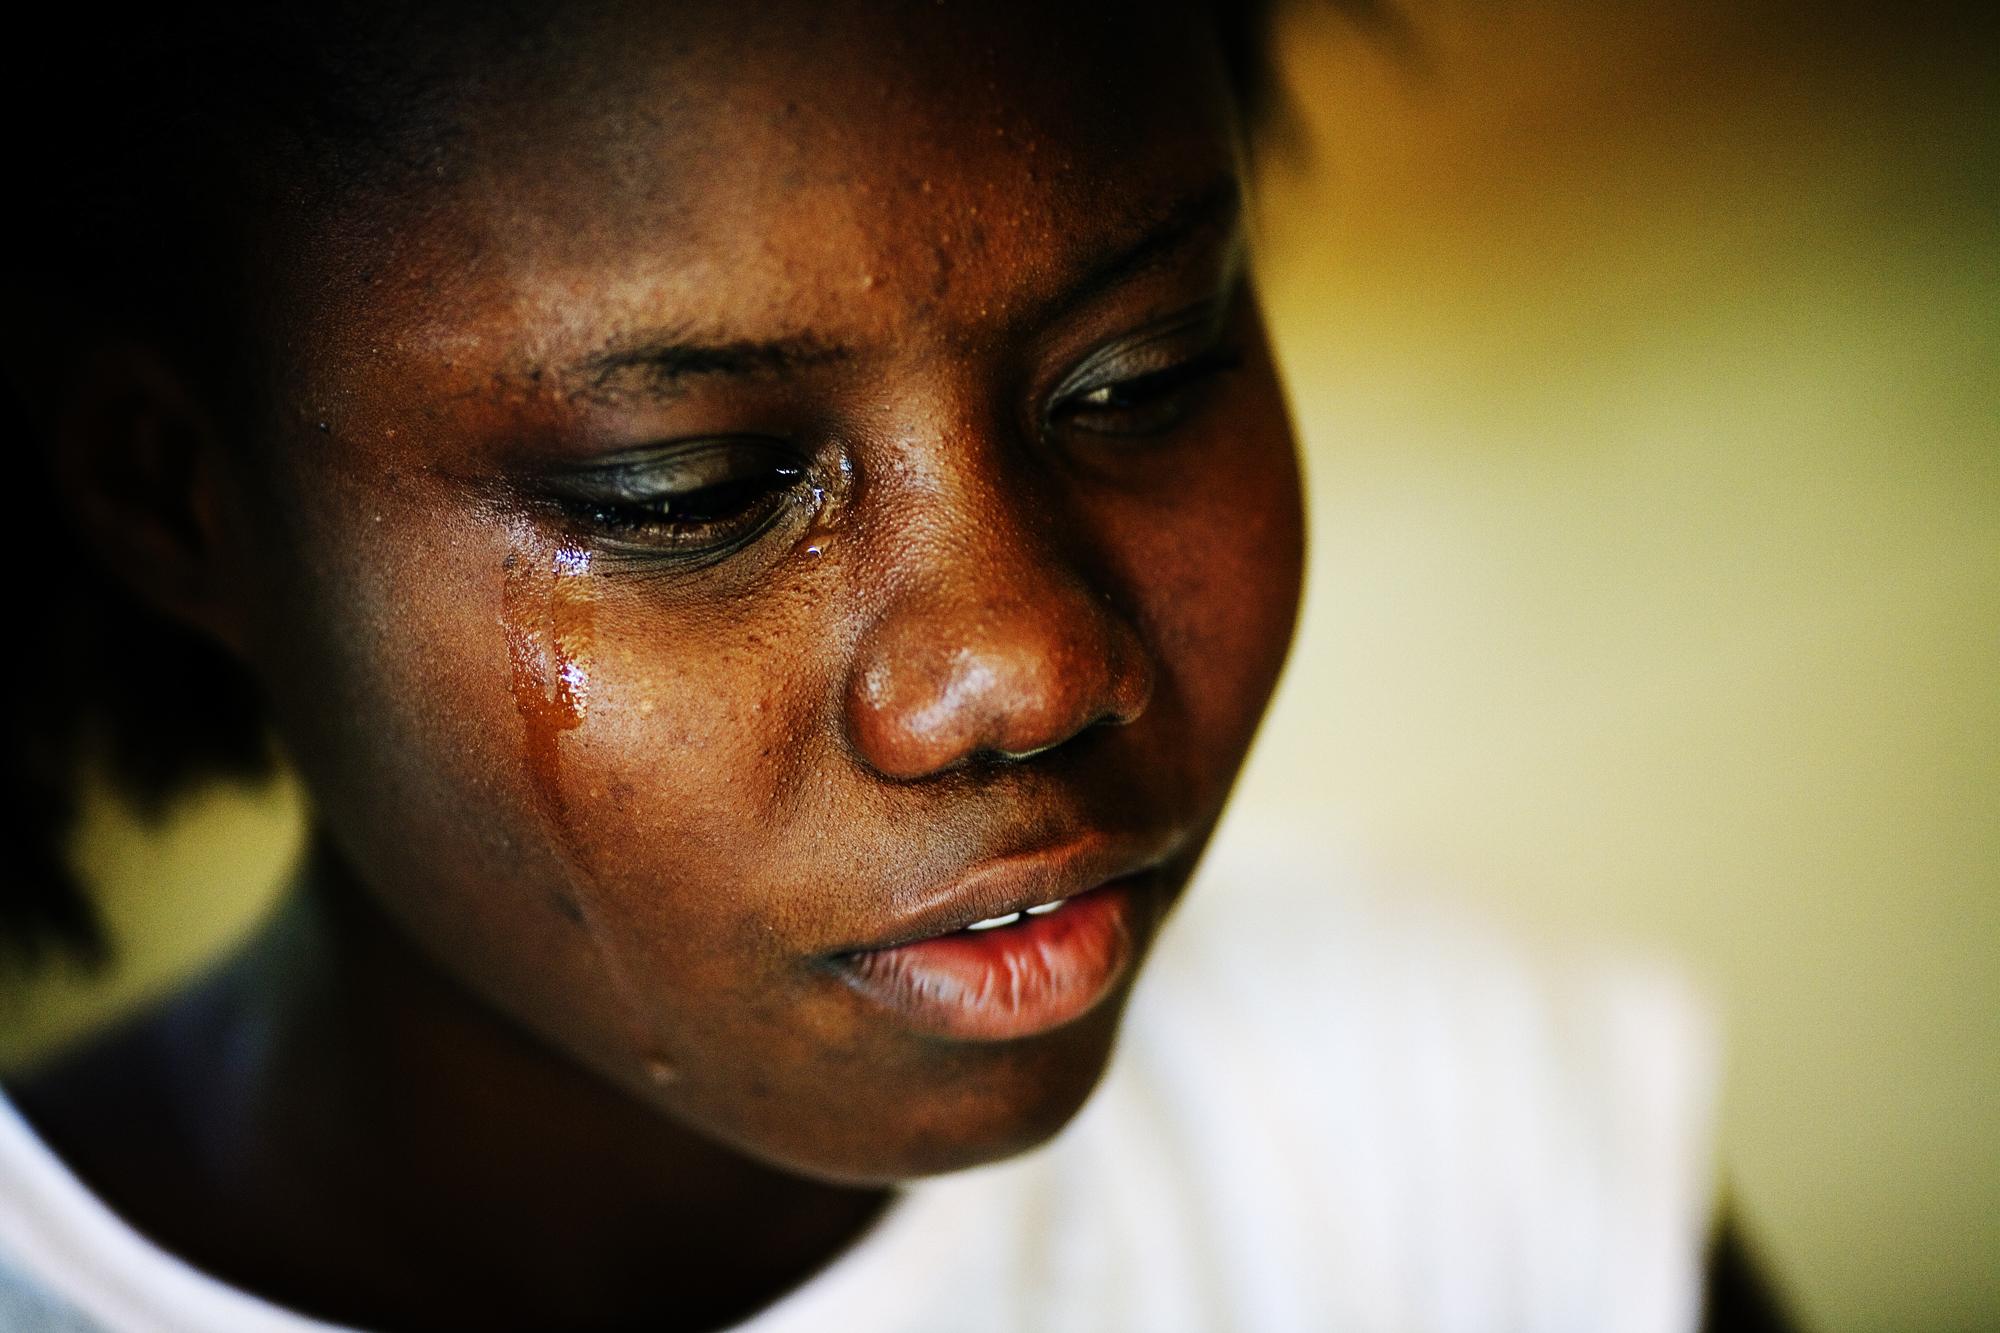 Haiti for MSF - HAITI Martissant, Port-au-Prince
A young girl cries in...